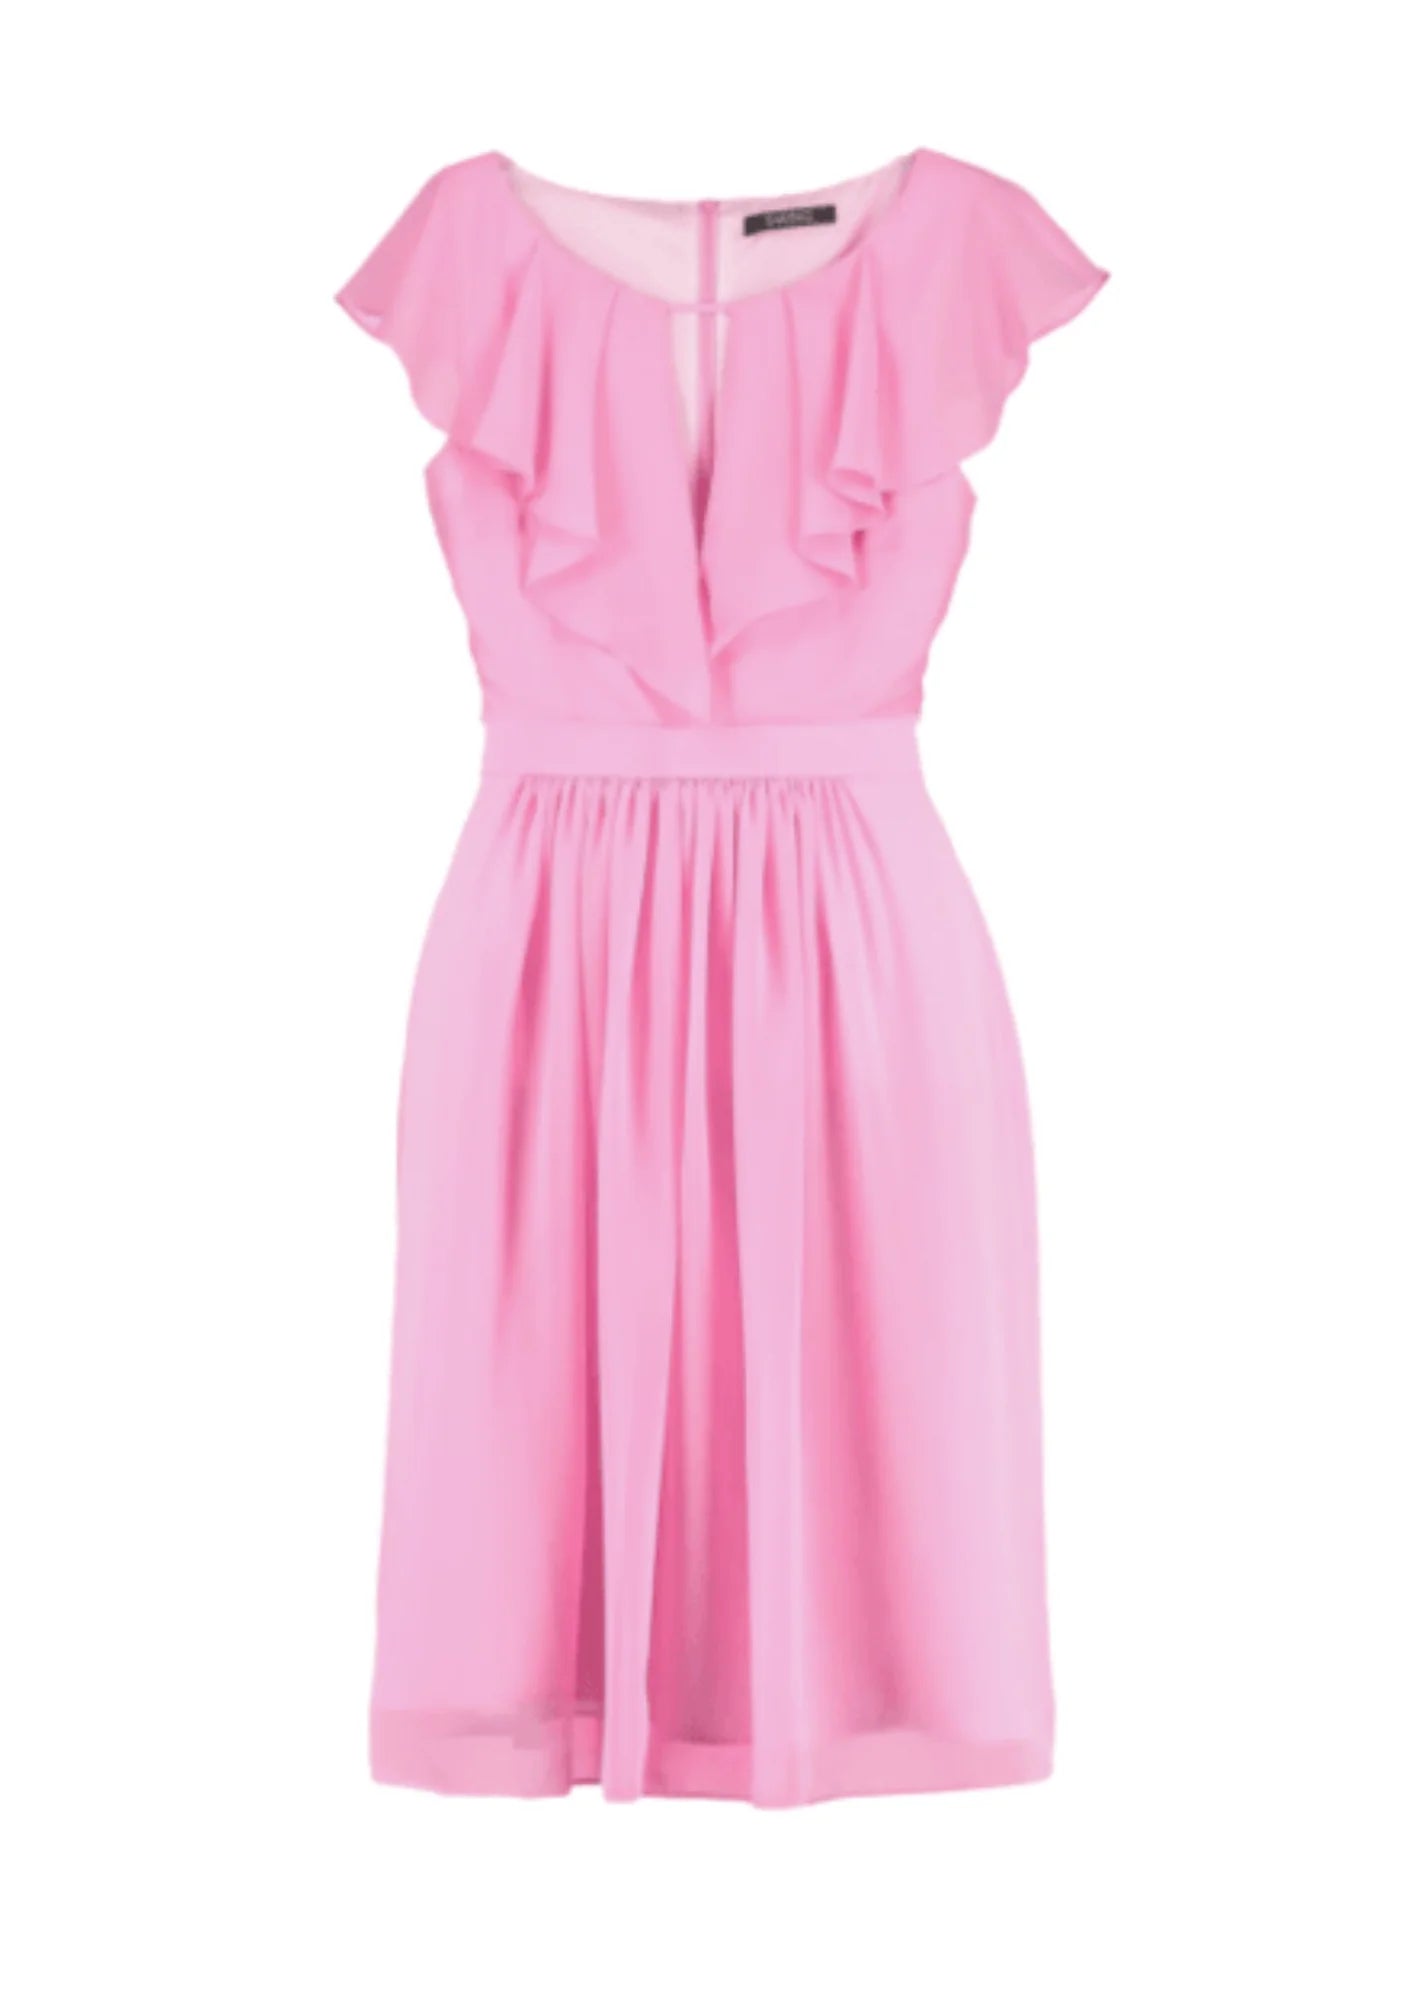 PINK DRESS WITH RUFFLED COLLAR